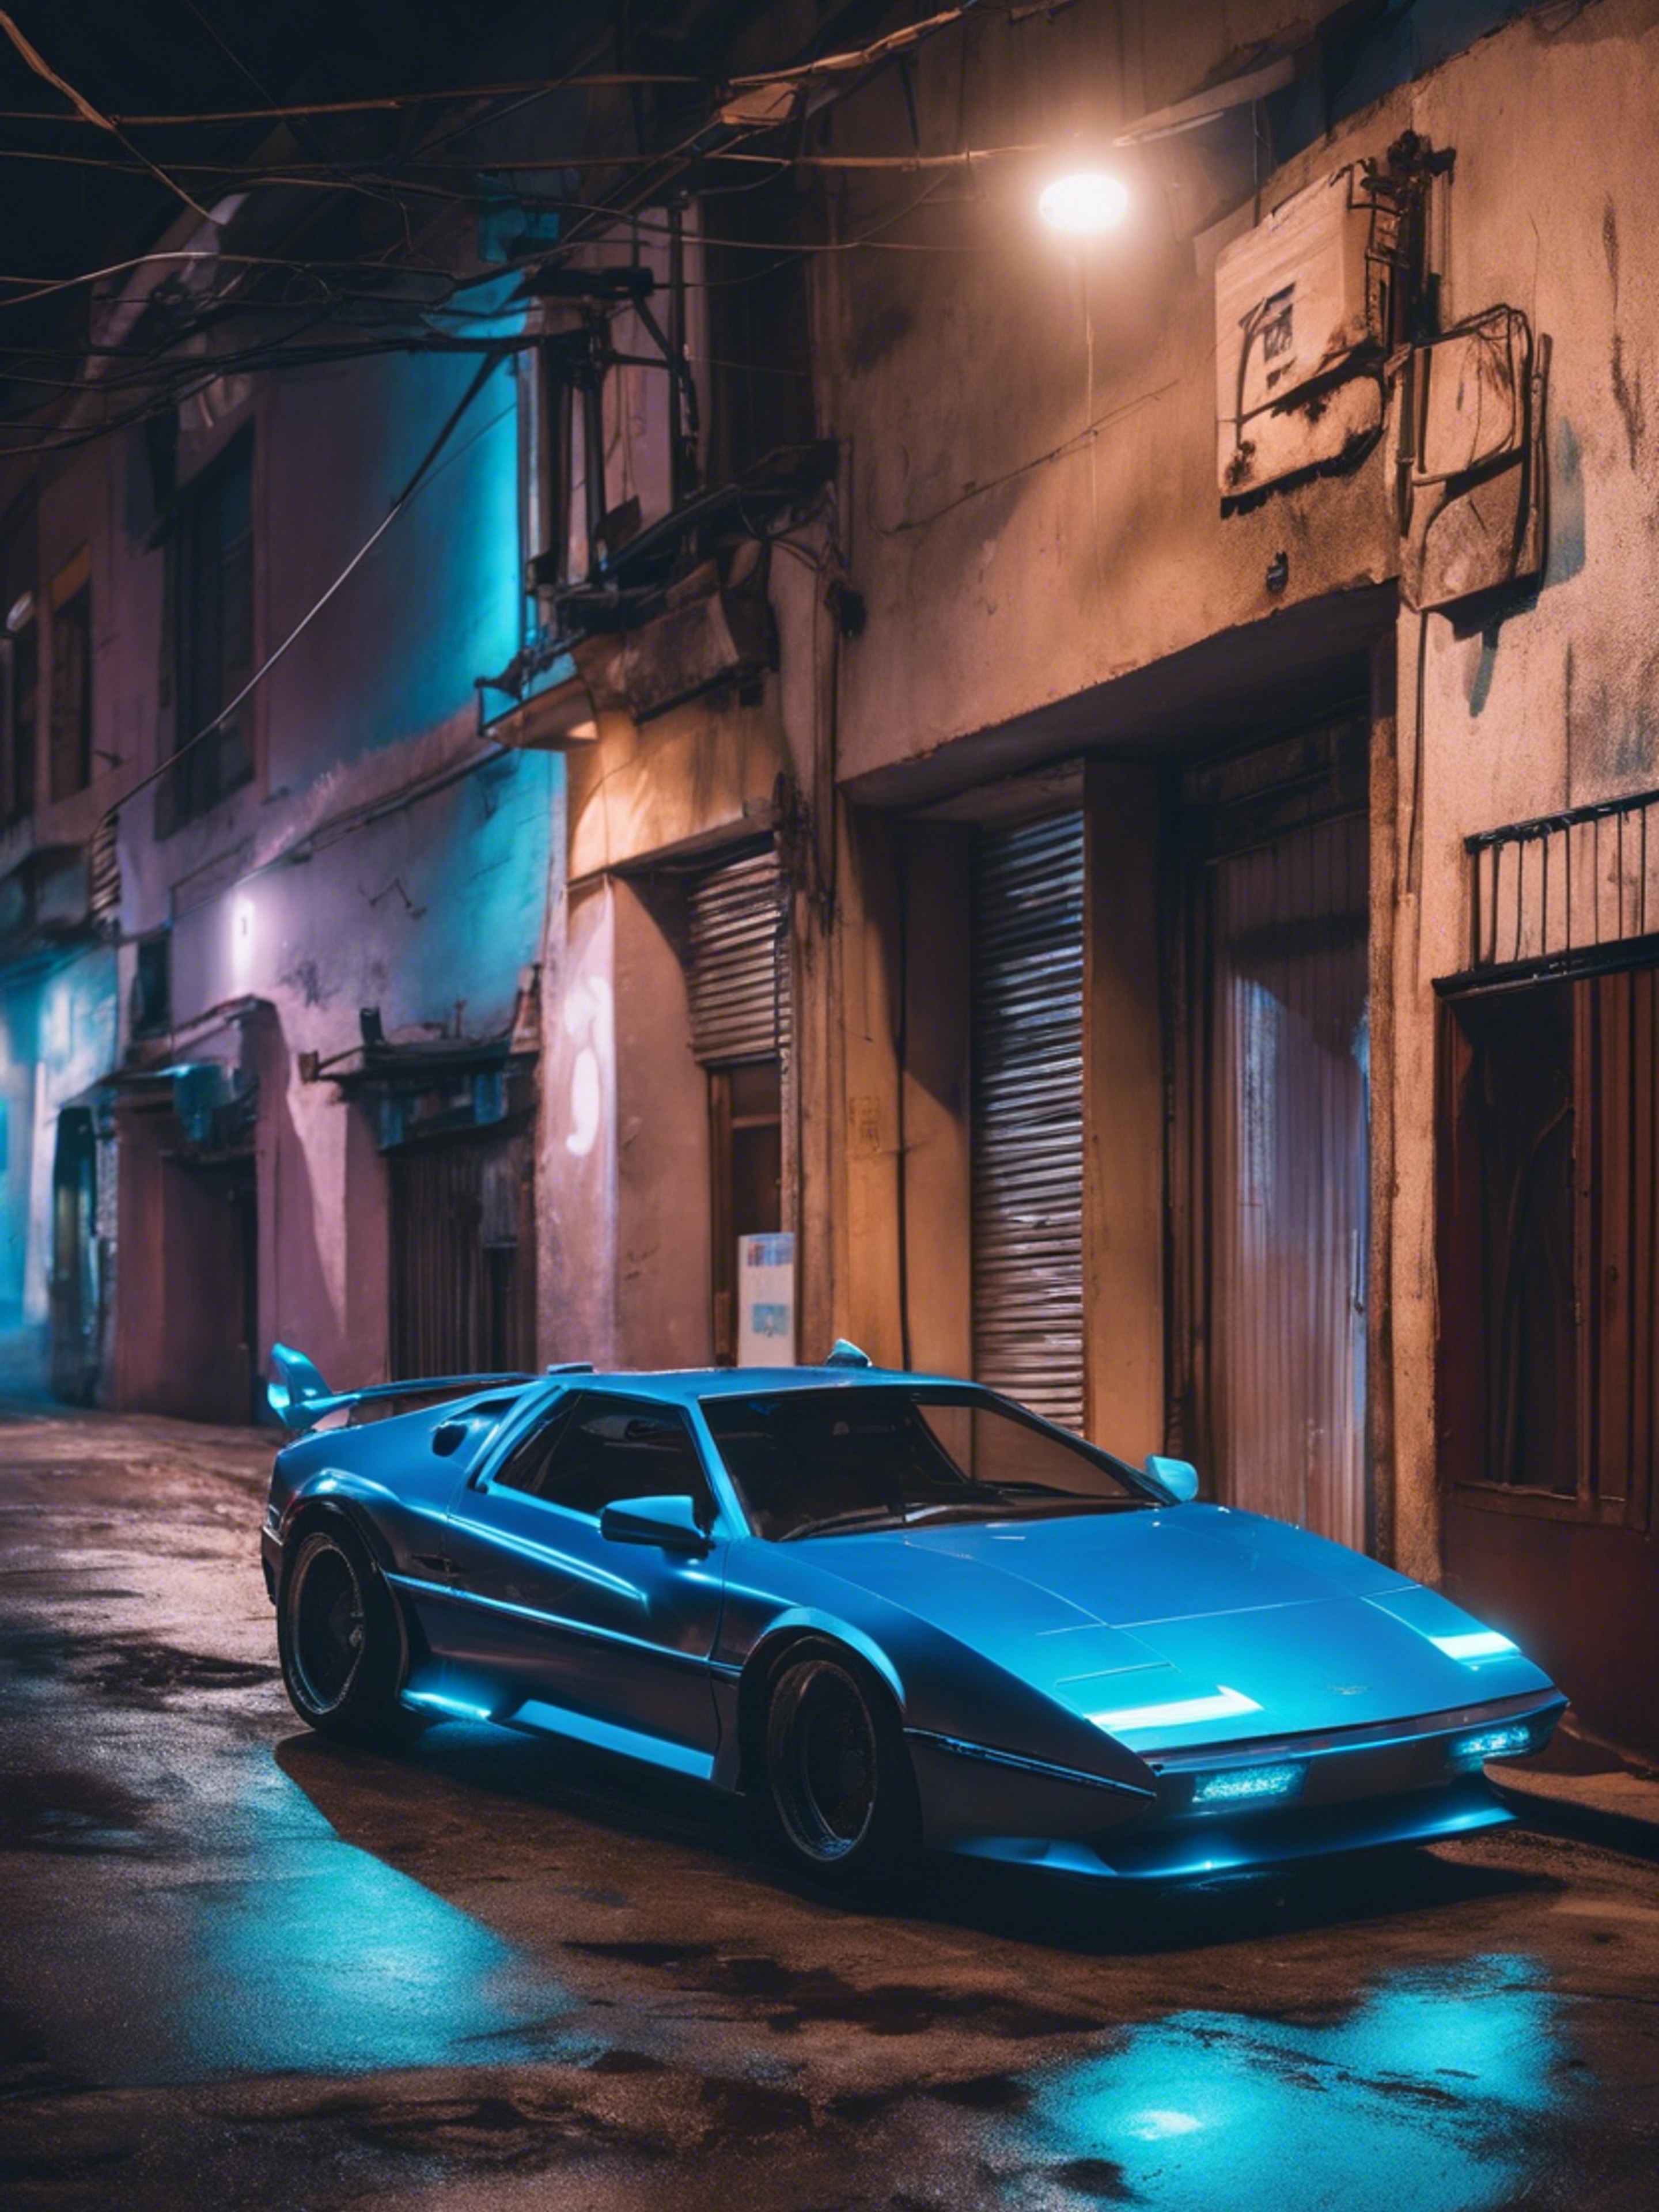 A cyberpunk themed sports car glowing with neon blue underlights parked in a dim alley. Тапет[b442527eec5a4d00a6f1]